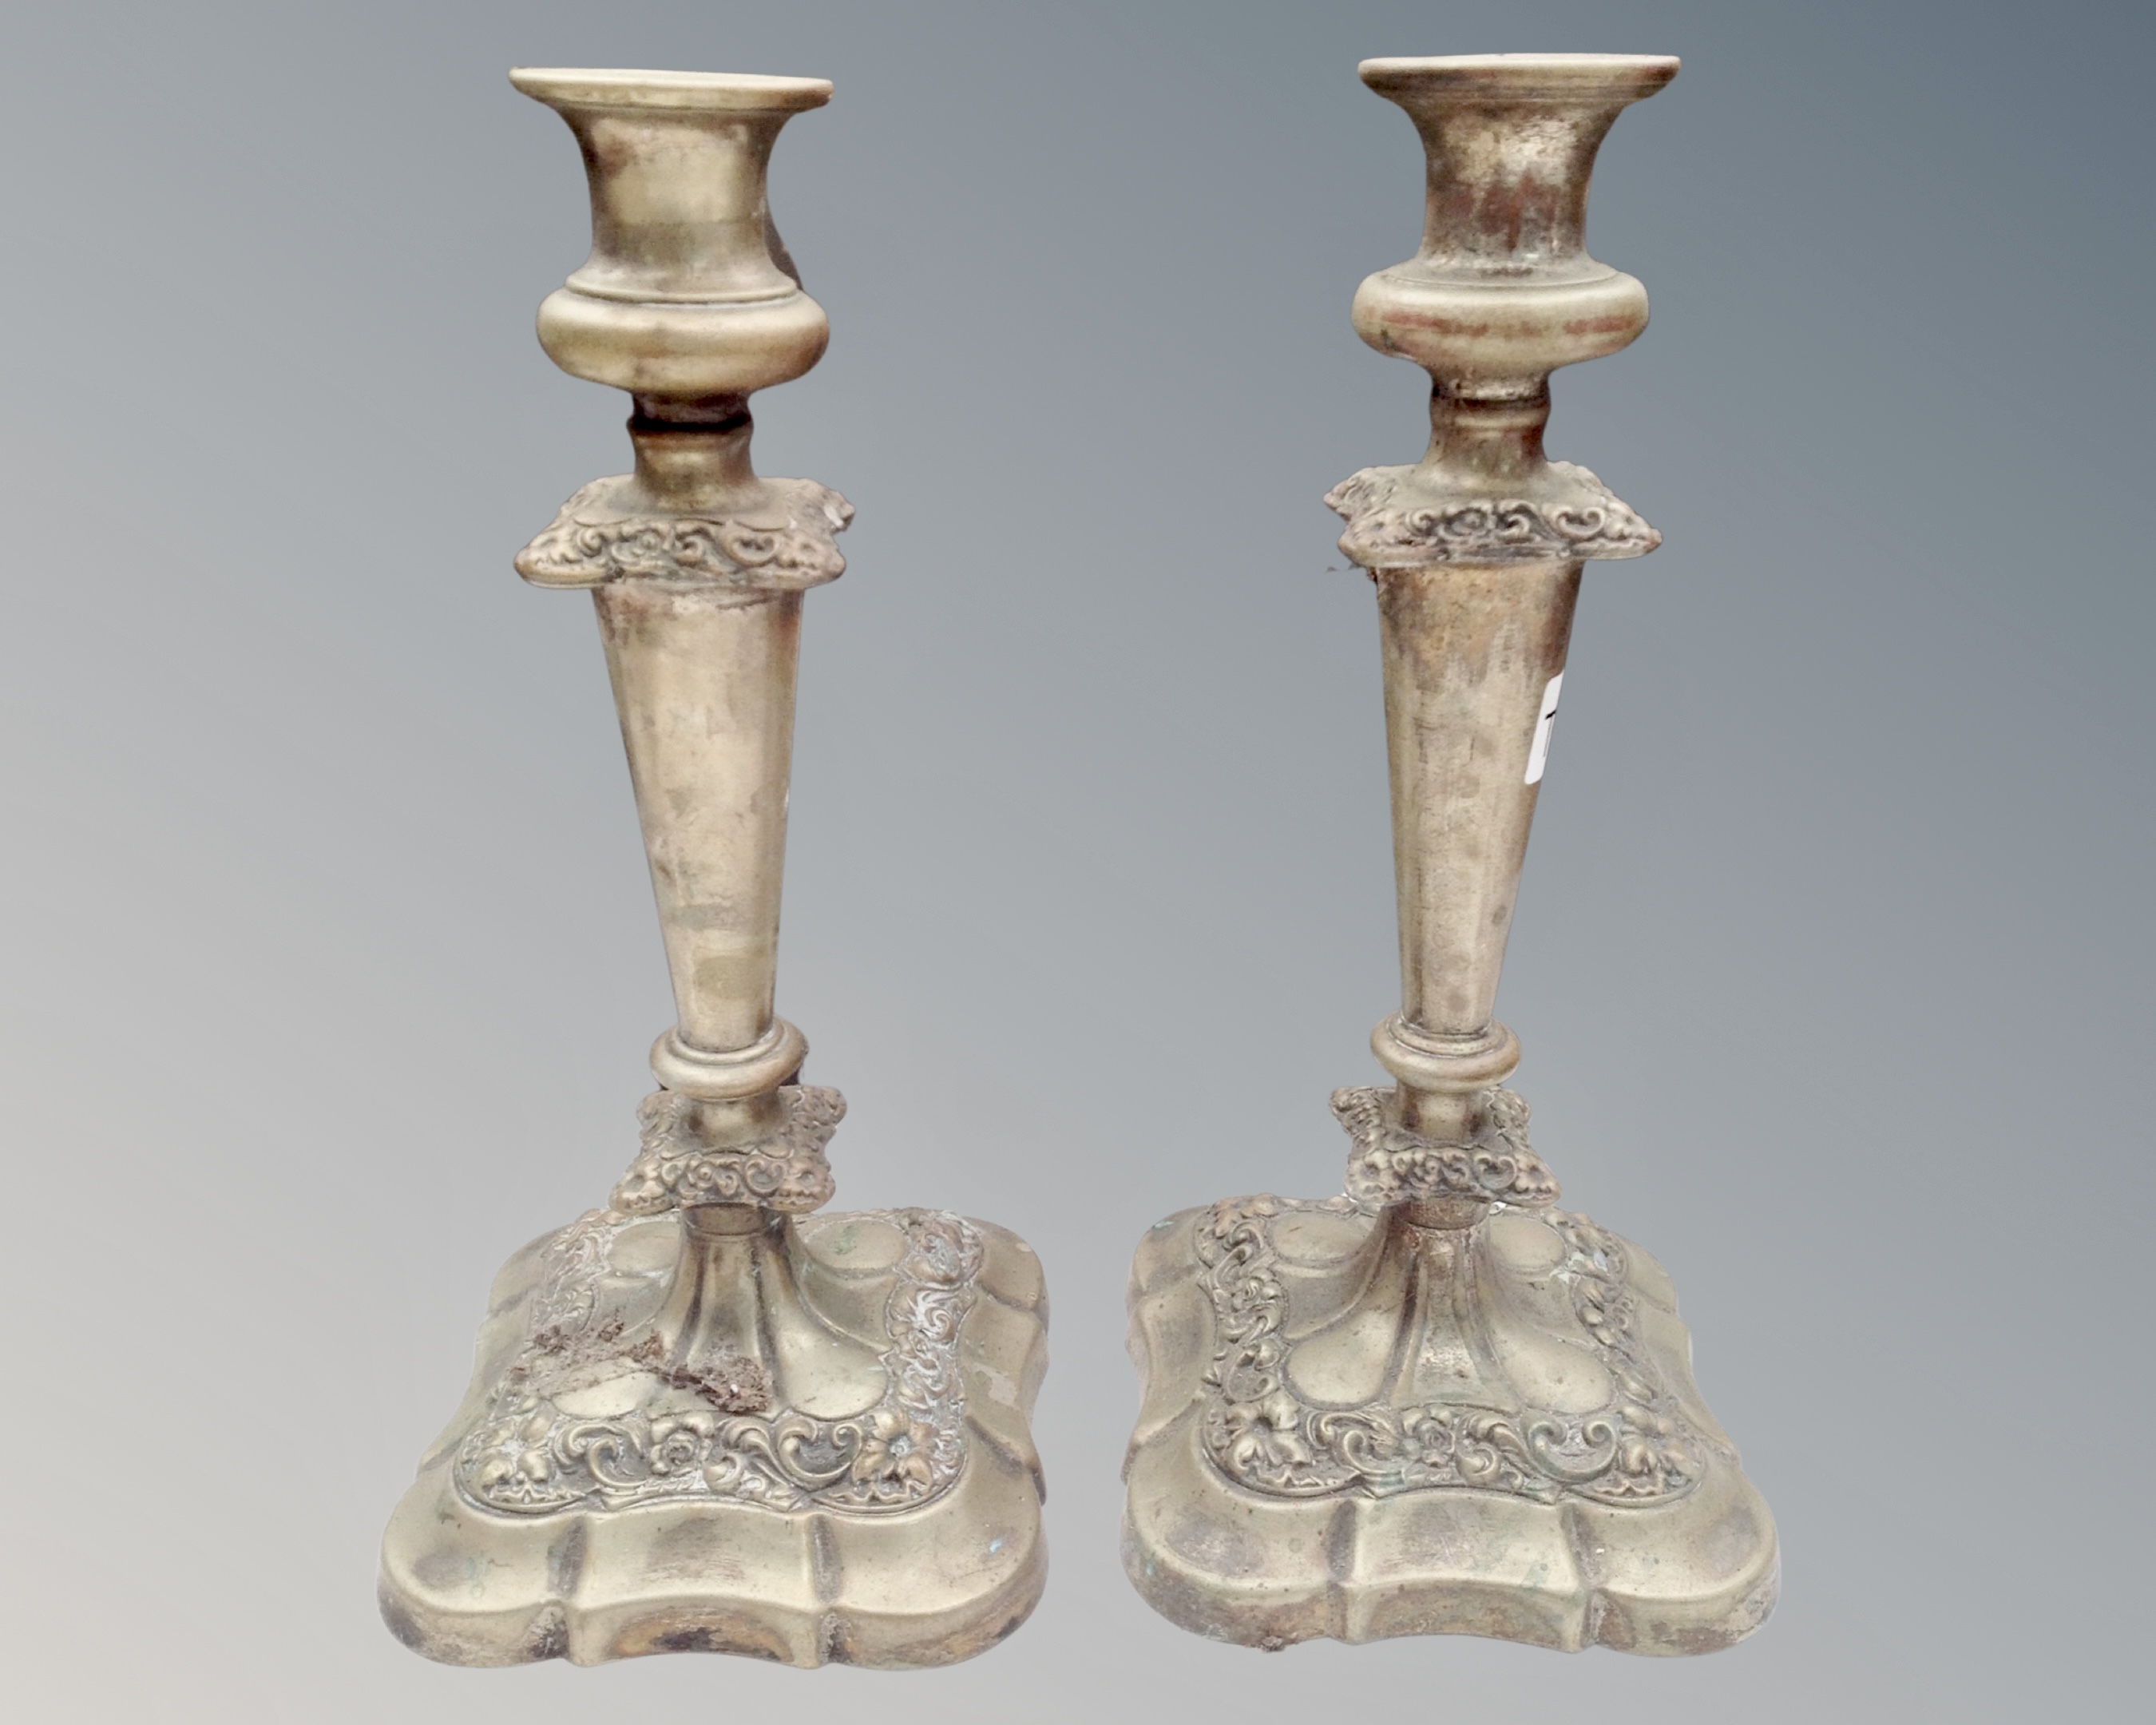 A pair of Victorian plated candlesticks.